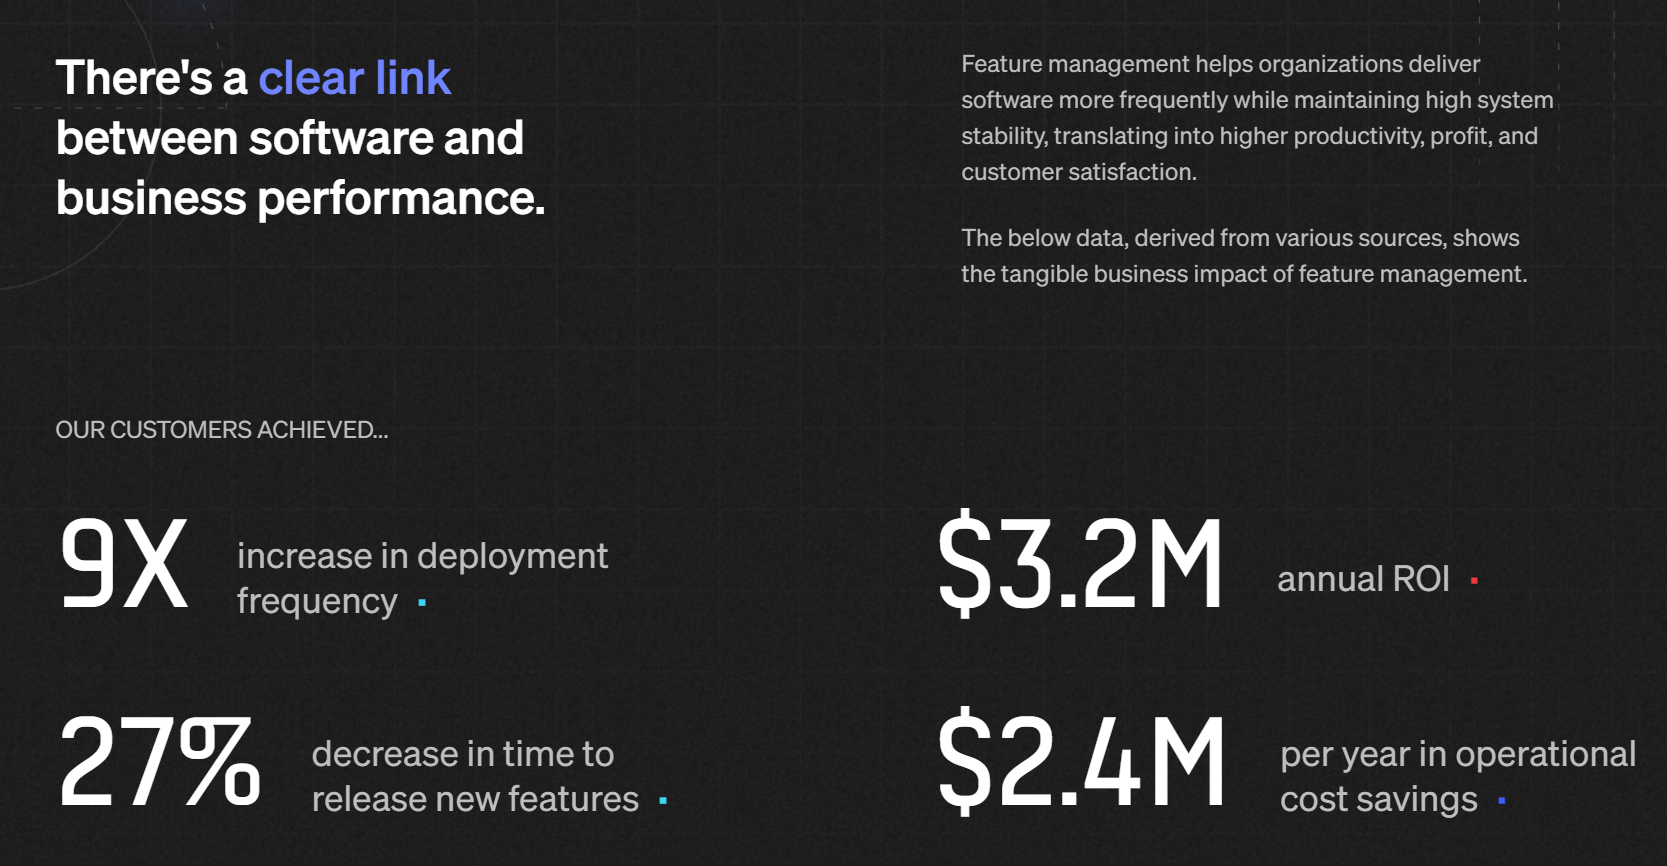 LaunchDarkly has a dedicated landing page explaining feature management ROI